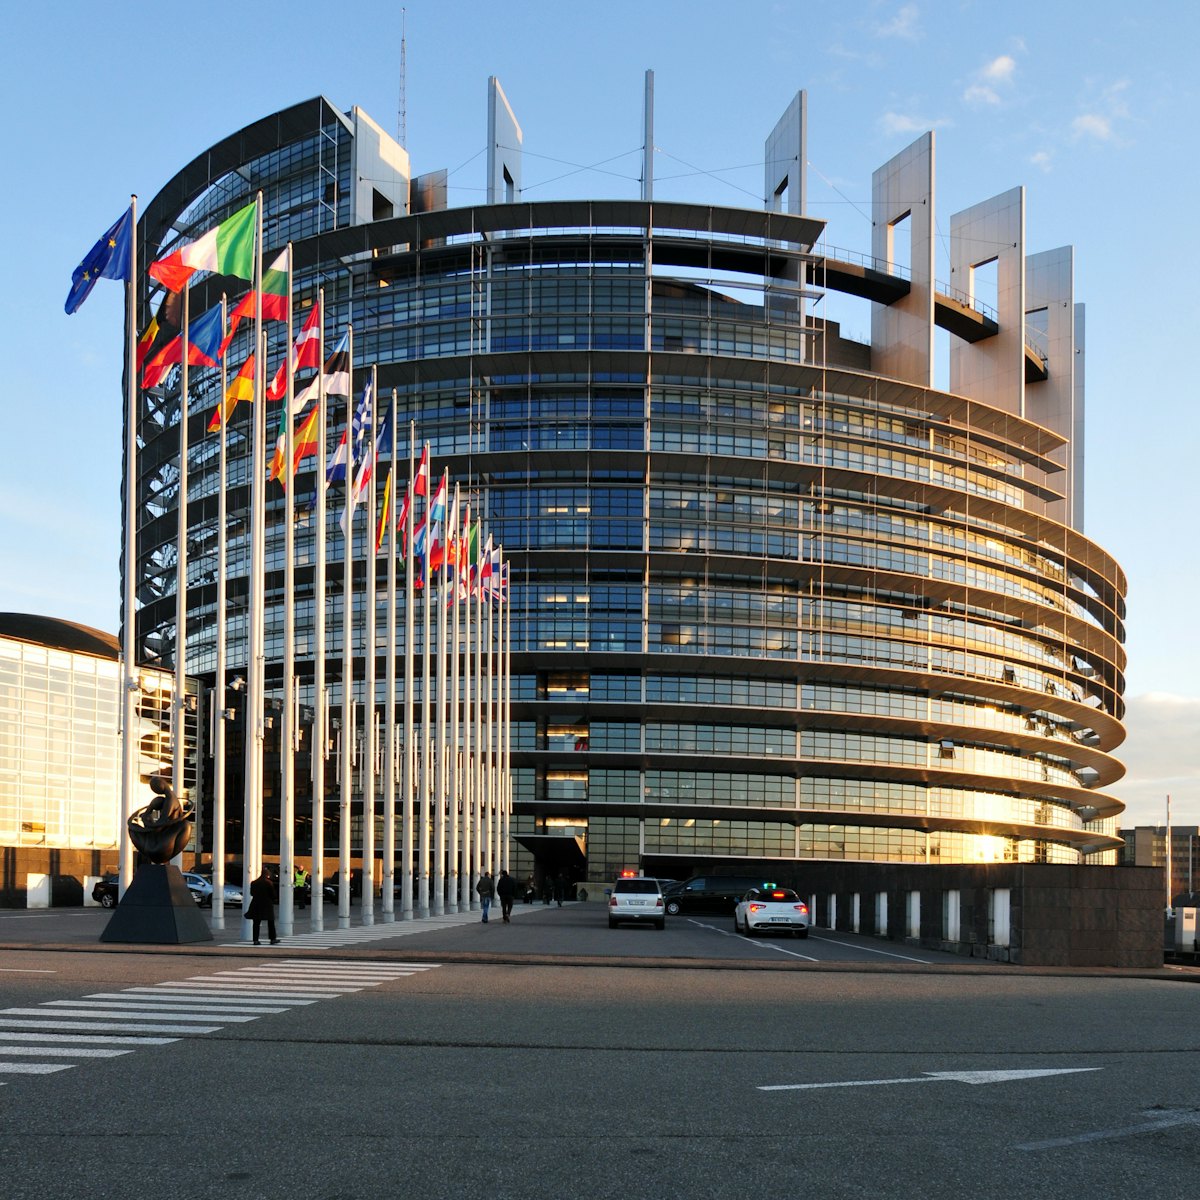 The European Parliament building. Over 100 members of the European Parliament and national Parliaments throughout Europe have signed a statement calling for the release of all Yemeni Baha’i prisoners. (photo accessed via Wikimedia Commons)